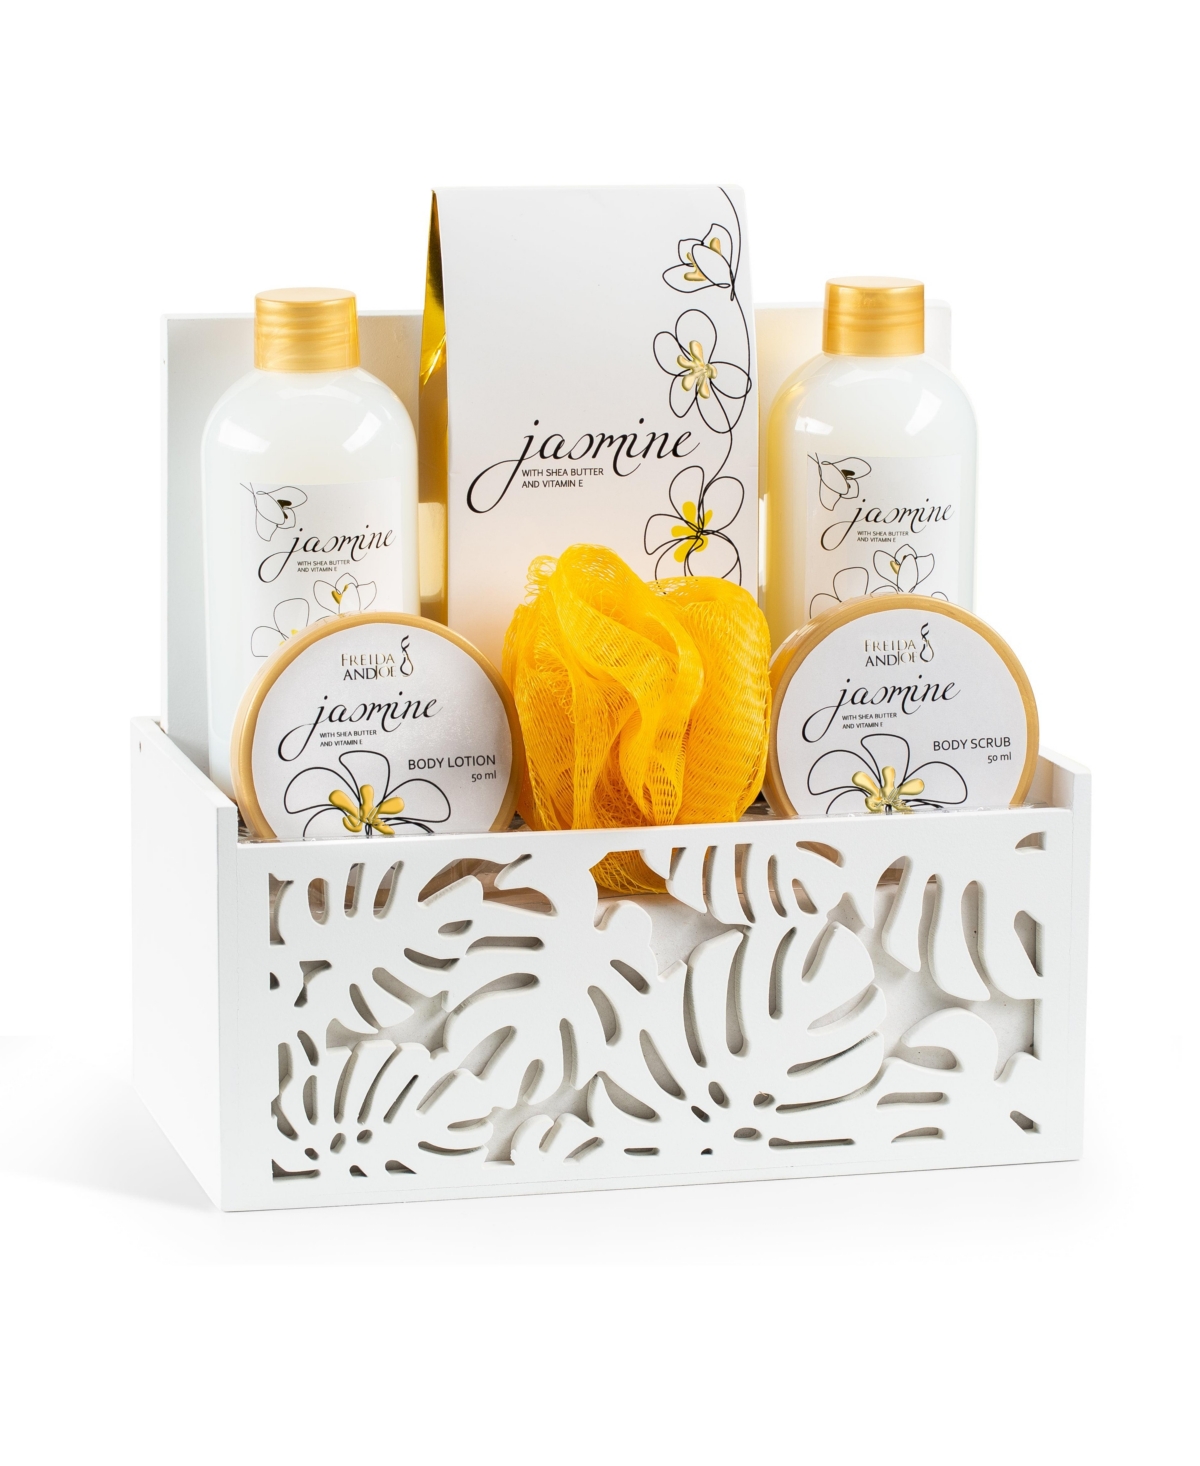 Jasmine Fragrance Bath & Body Set in White Tissue Box Luxury Body Care Mothers Day Gifts for Mom - White